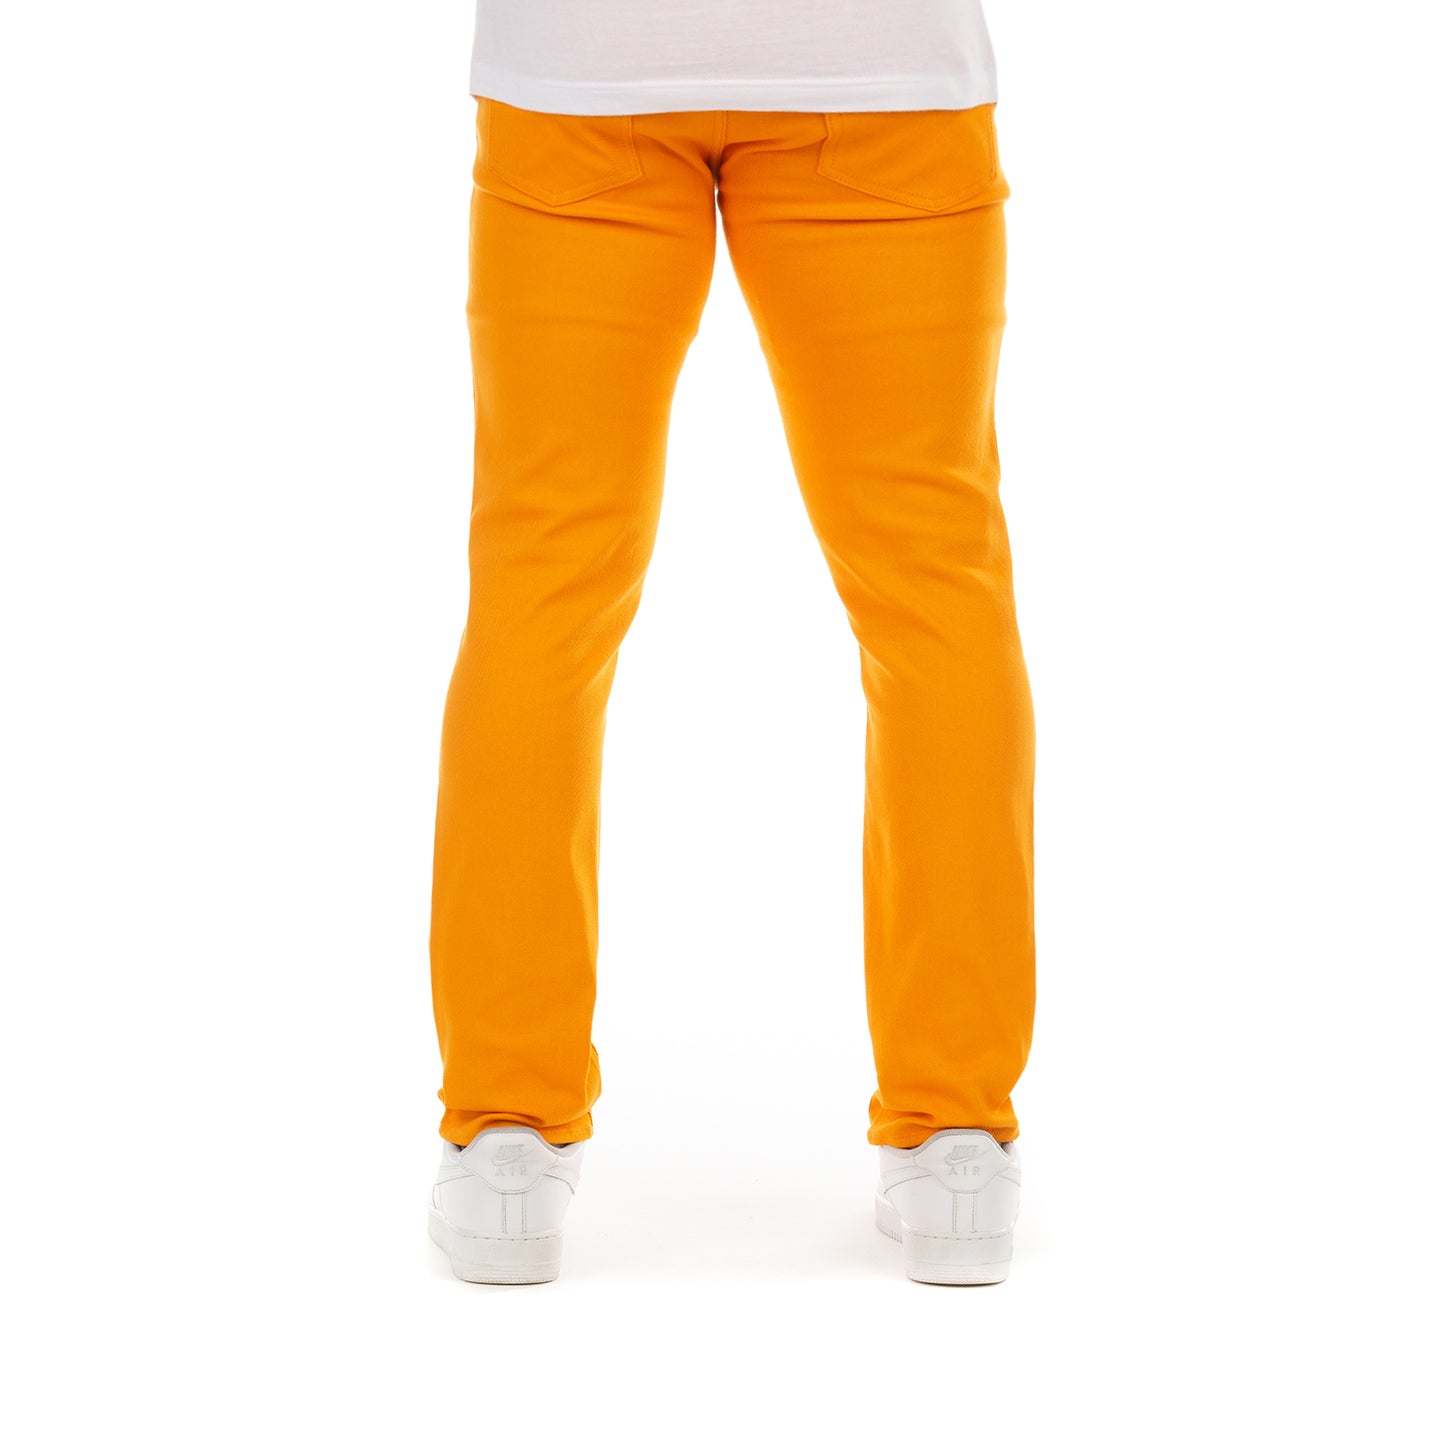 Vibrant Orange Slim-Fit Stylish Pants - Smooth and Lightweight Fabric - Casual Cypher Yellow Pants